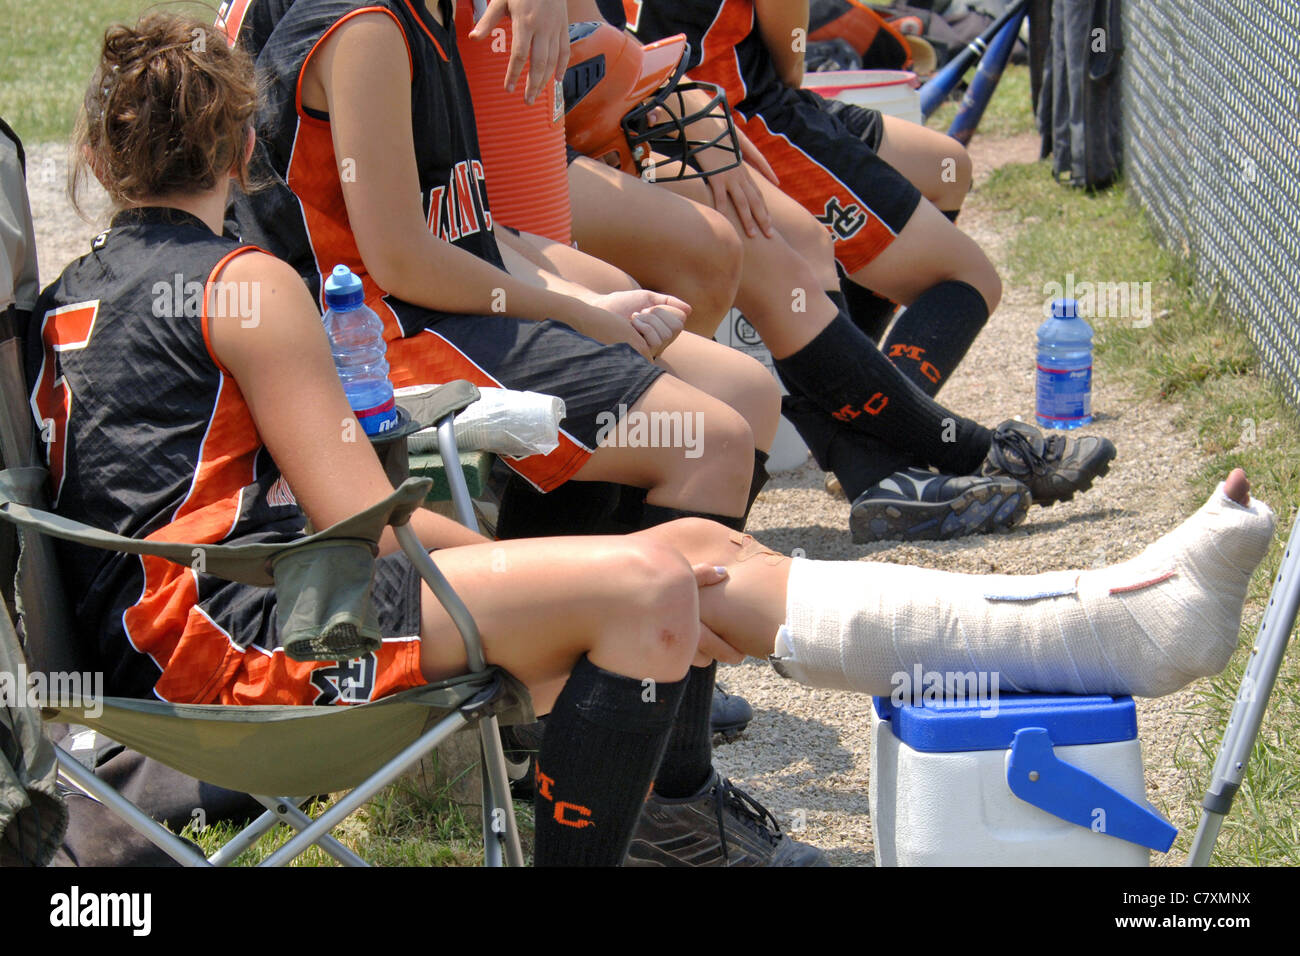 Injured female Softball player with her teammates. Stock Photo